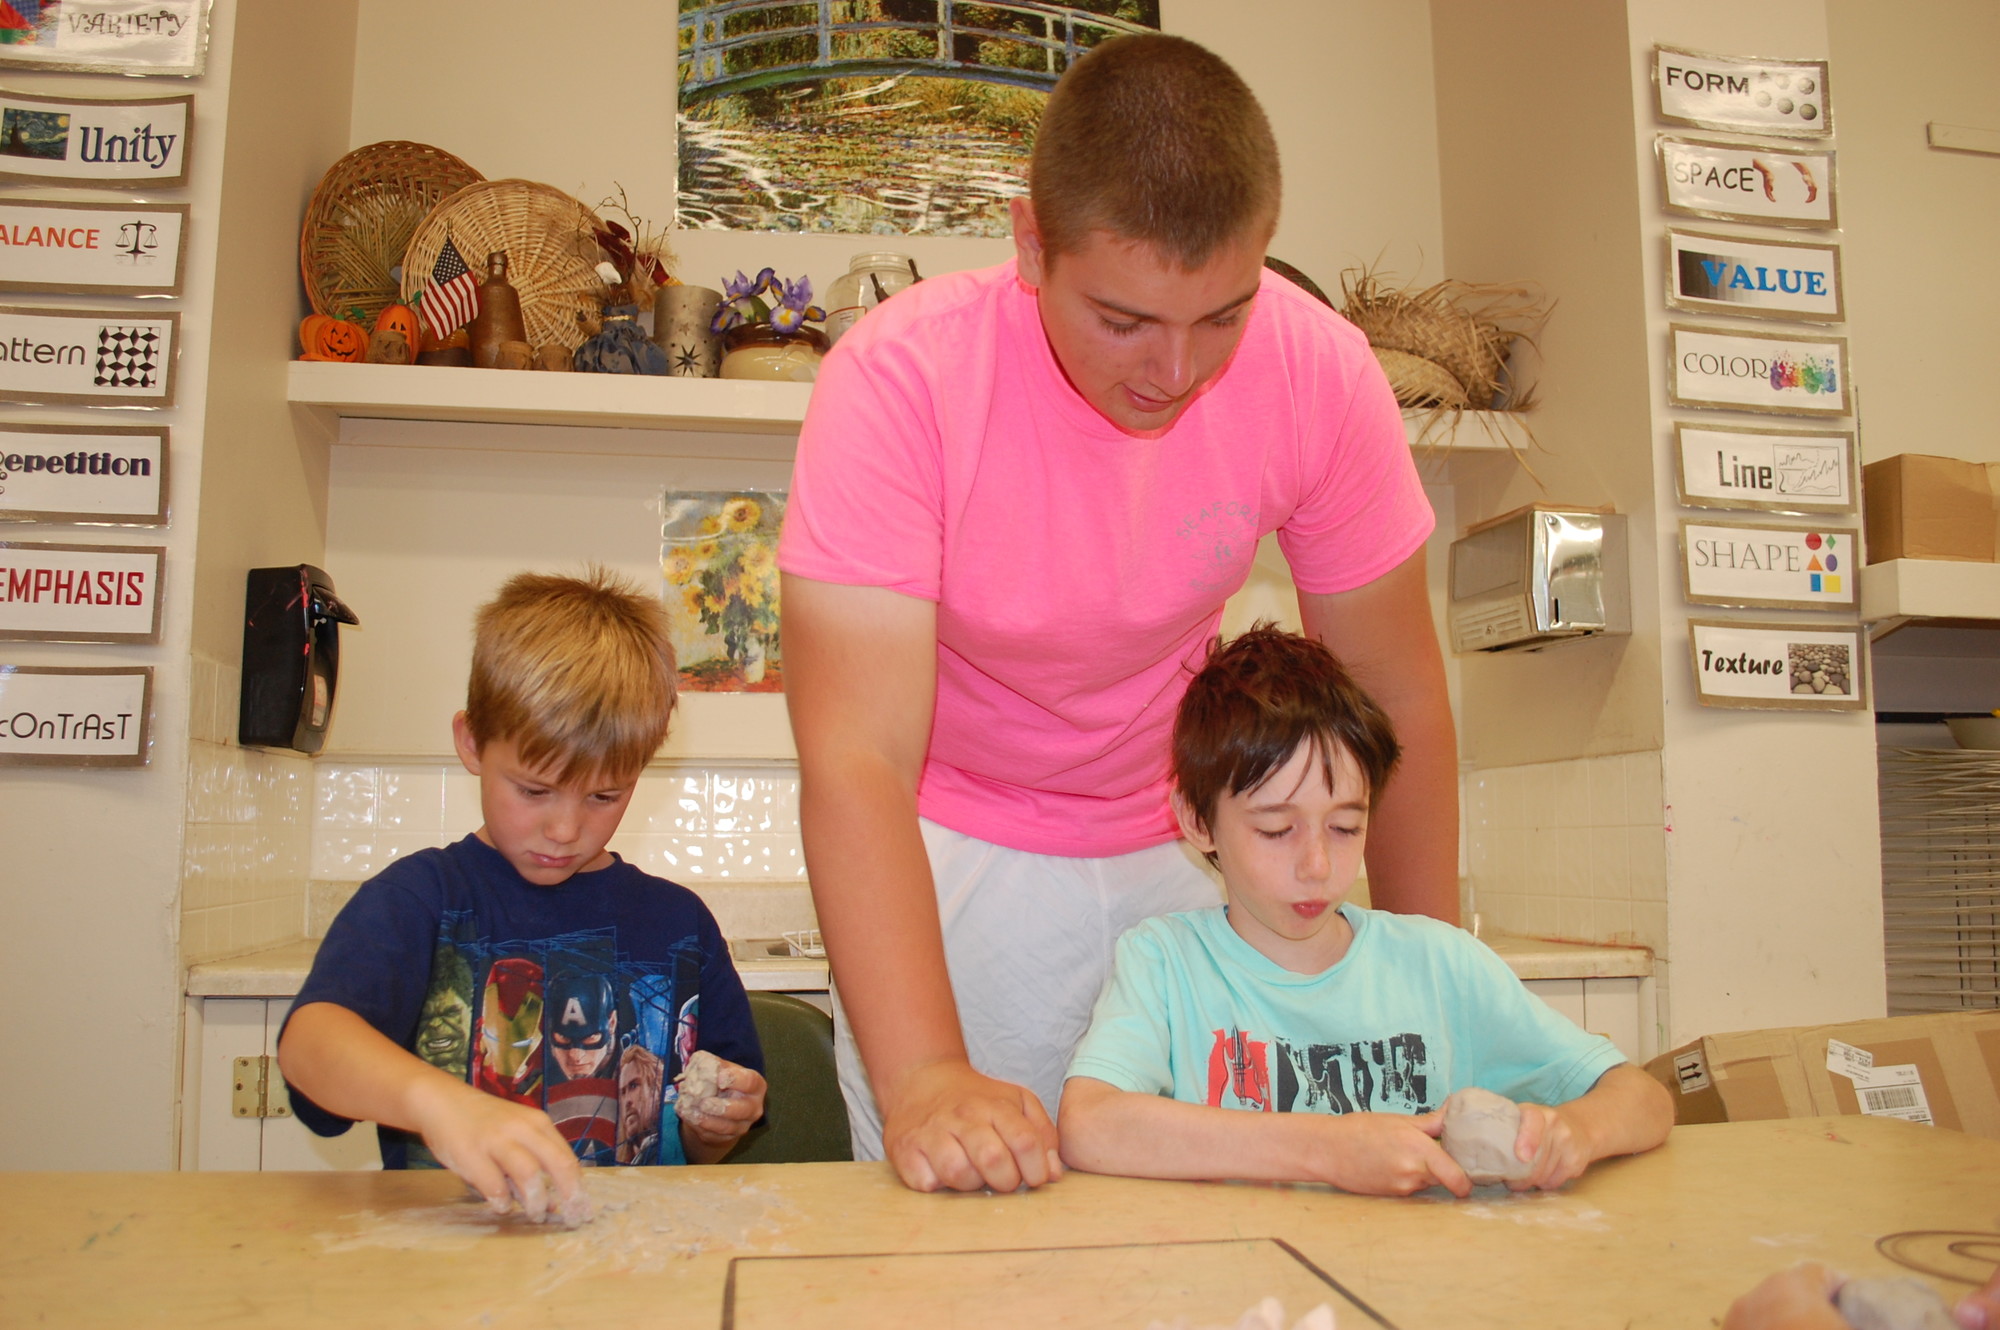 Christian Wendt, a recent Seaford High graduate, helped out Ryan Falta and Daniel Walsh, second graders at the Manor School, during arts and crafts.